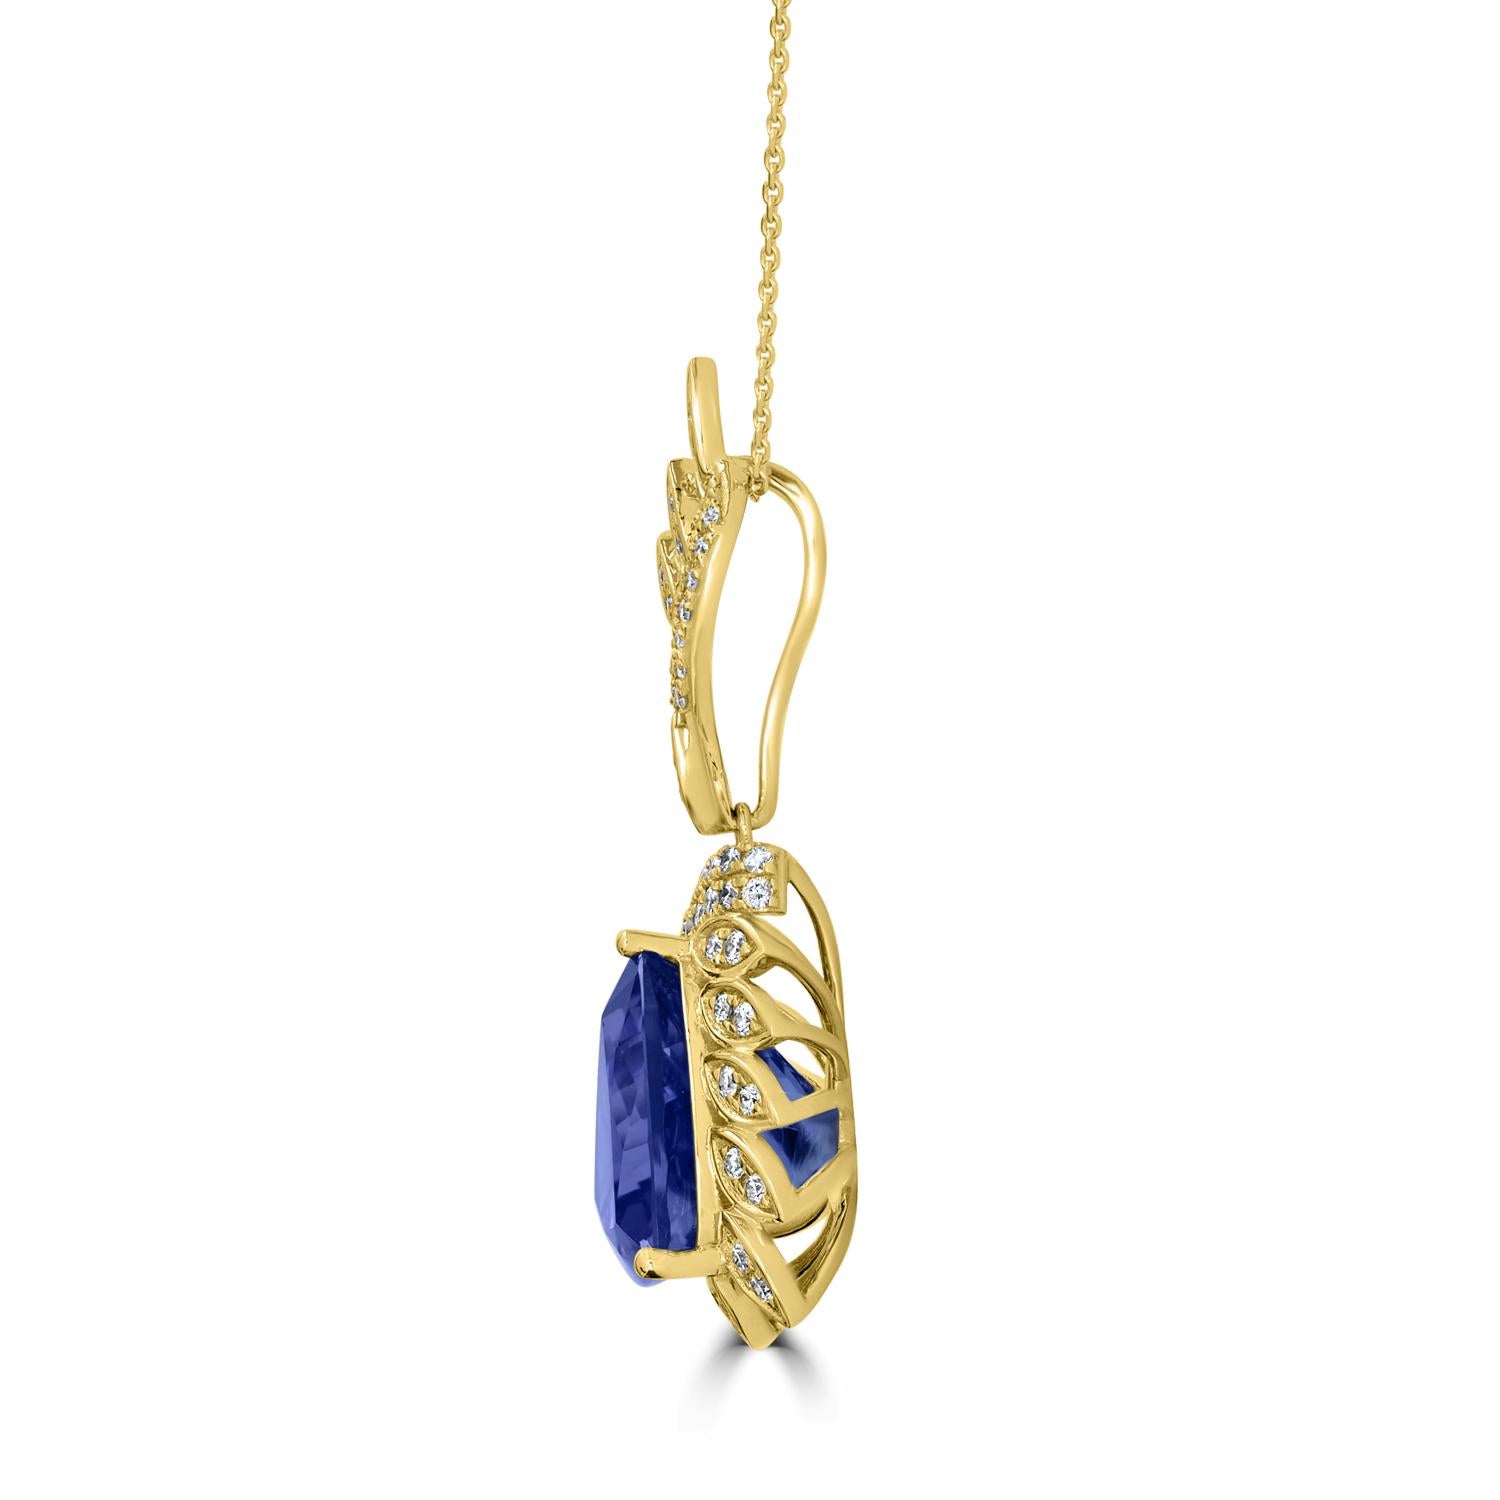 This 10.55 carat Tanzanite pendant with 0.53 total carats of diamonds set in 18K yellow gold is a truly remarkable piece of jewelry. The tanzanite gemstone is a stunning shade of blue-violet that is both striking and elegant. It is perfectly